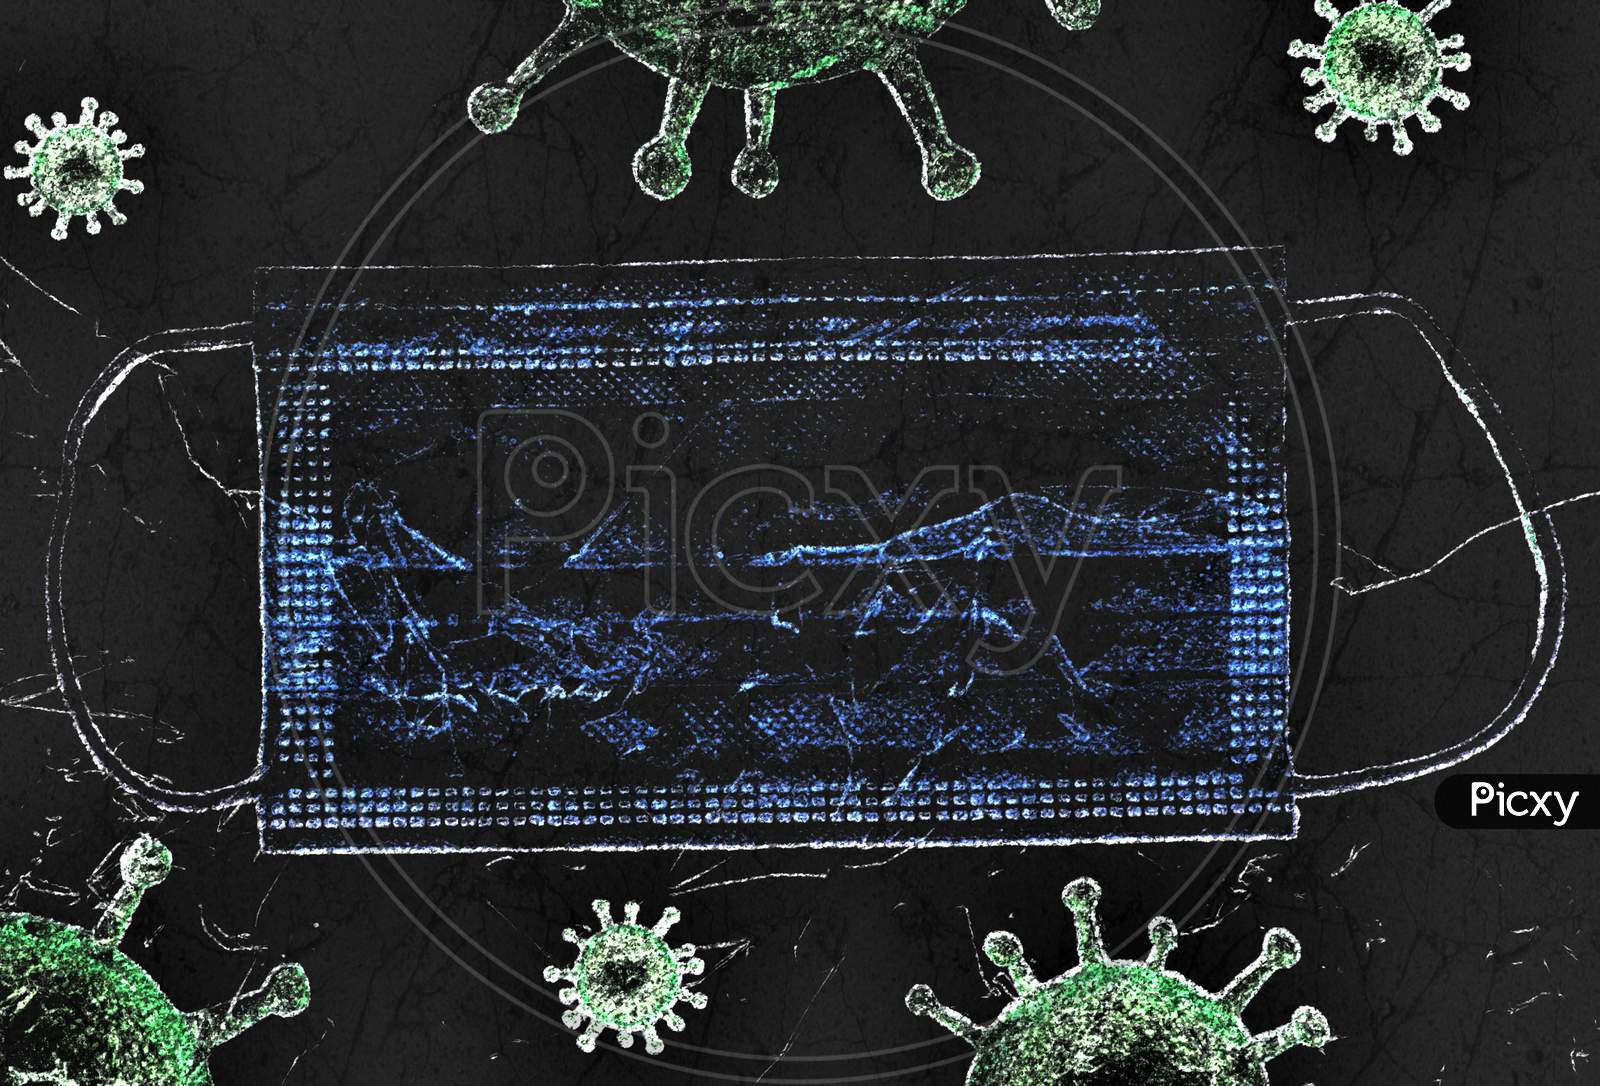 3D-Illustration Of A Chalk Blackboard In School Showing A Medical Virus Mask For Corona Virus Protection